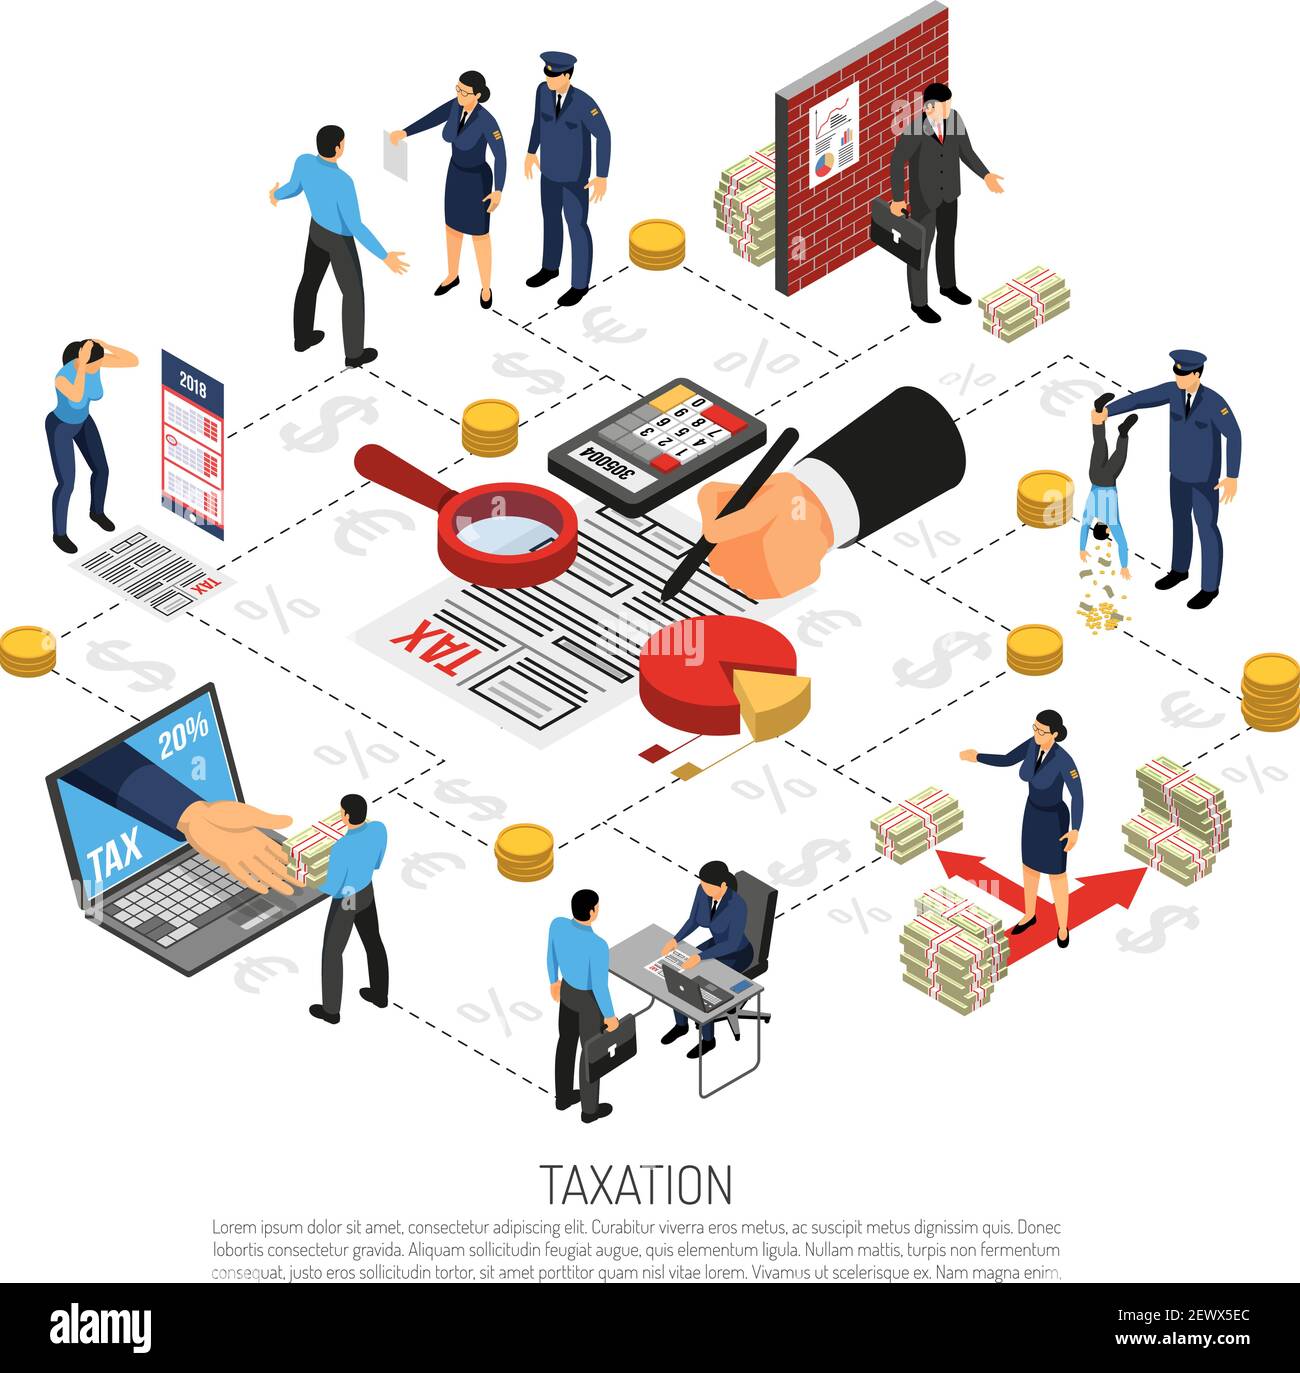 Tax inspection flowchart elements isometric poster with online declarations collecting corporate and private taxpayers contributions vector illustrati Stock Vector